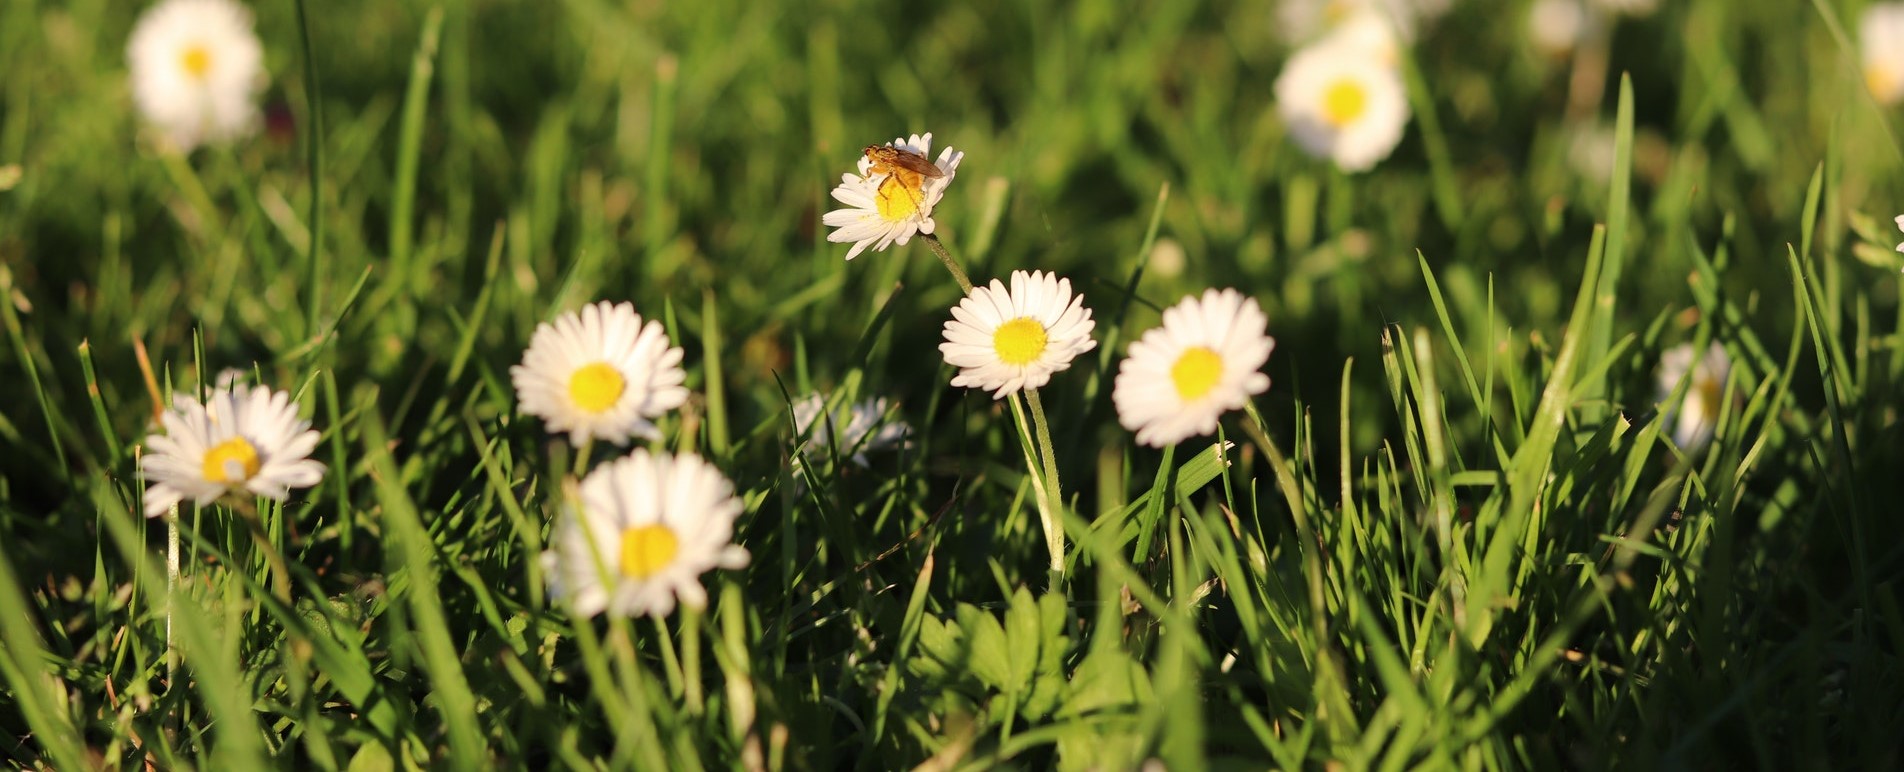 Lawn Care in May - Lawn Maintenance - Boston Seeds